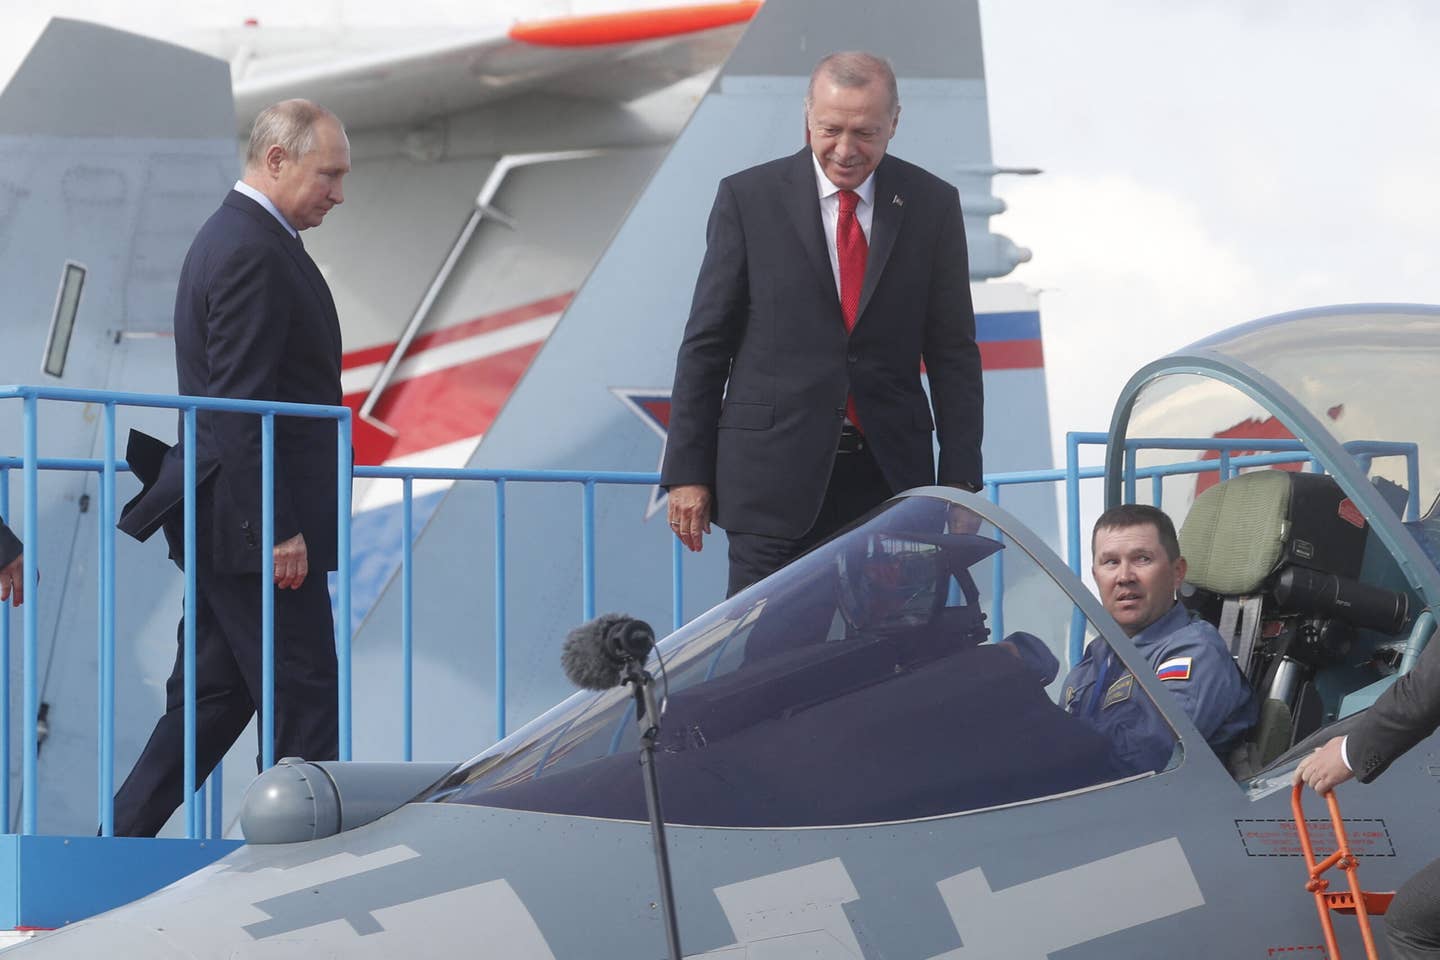 President Putin (left) and his Turkish counterpart Recep Tayyip Erdogan inspect a Su-57 during the MAKS 2019 International Aviation and Space Salon opening ceremony in Zhukovsky outside Moscow on August 27, 2019. <em>Photo by MAXIM SHIPENKOV/POOL/AFP via Getty Images</em>